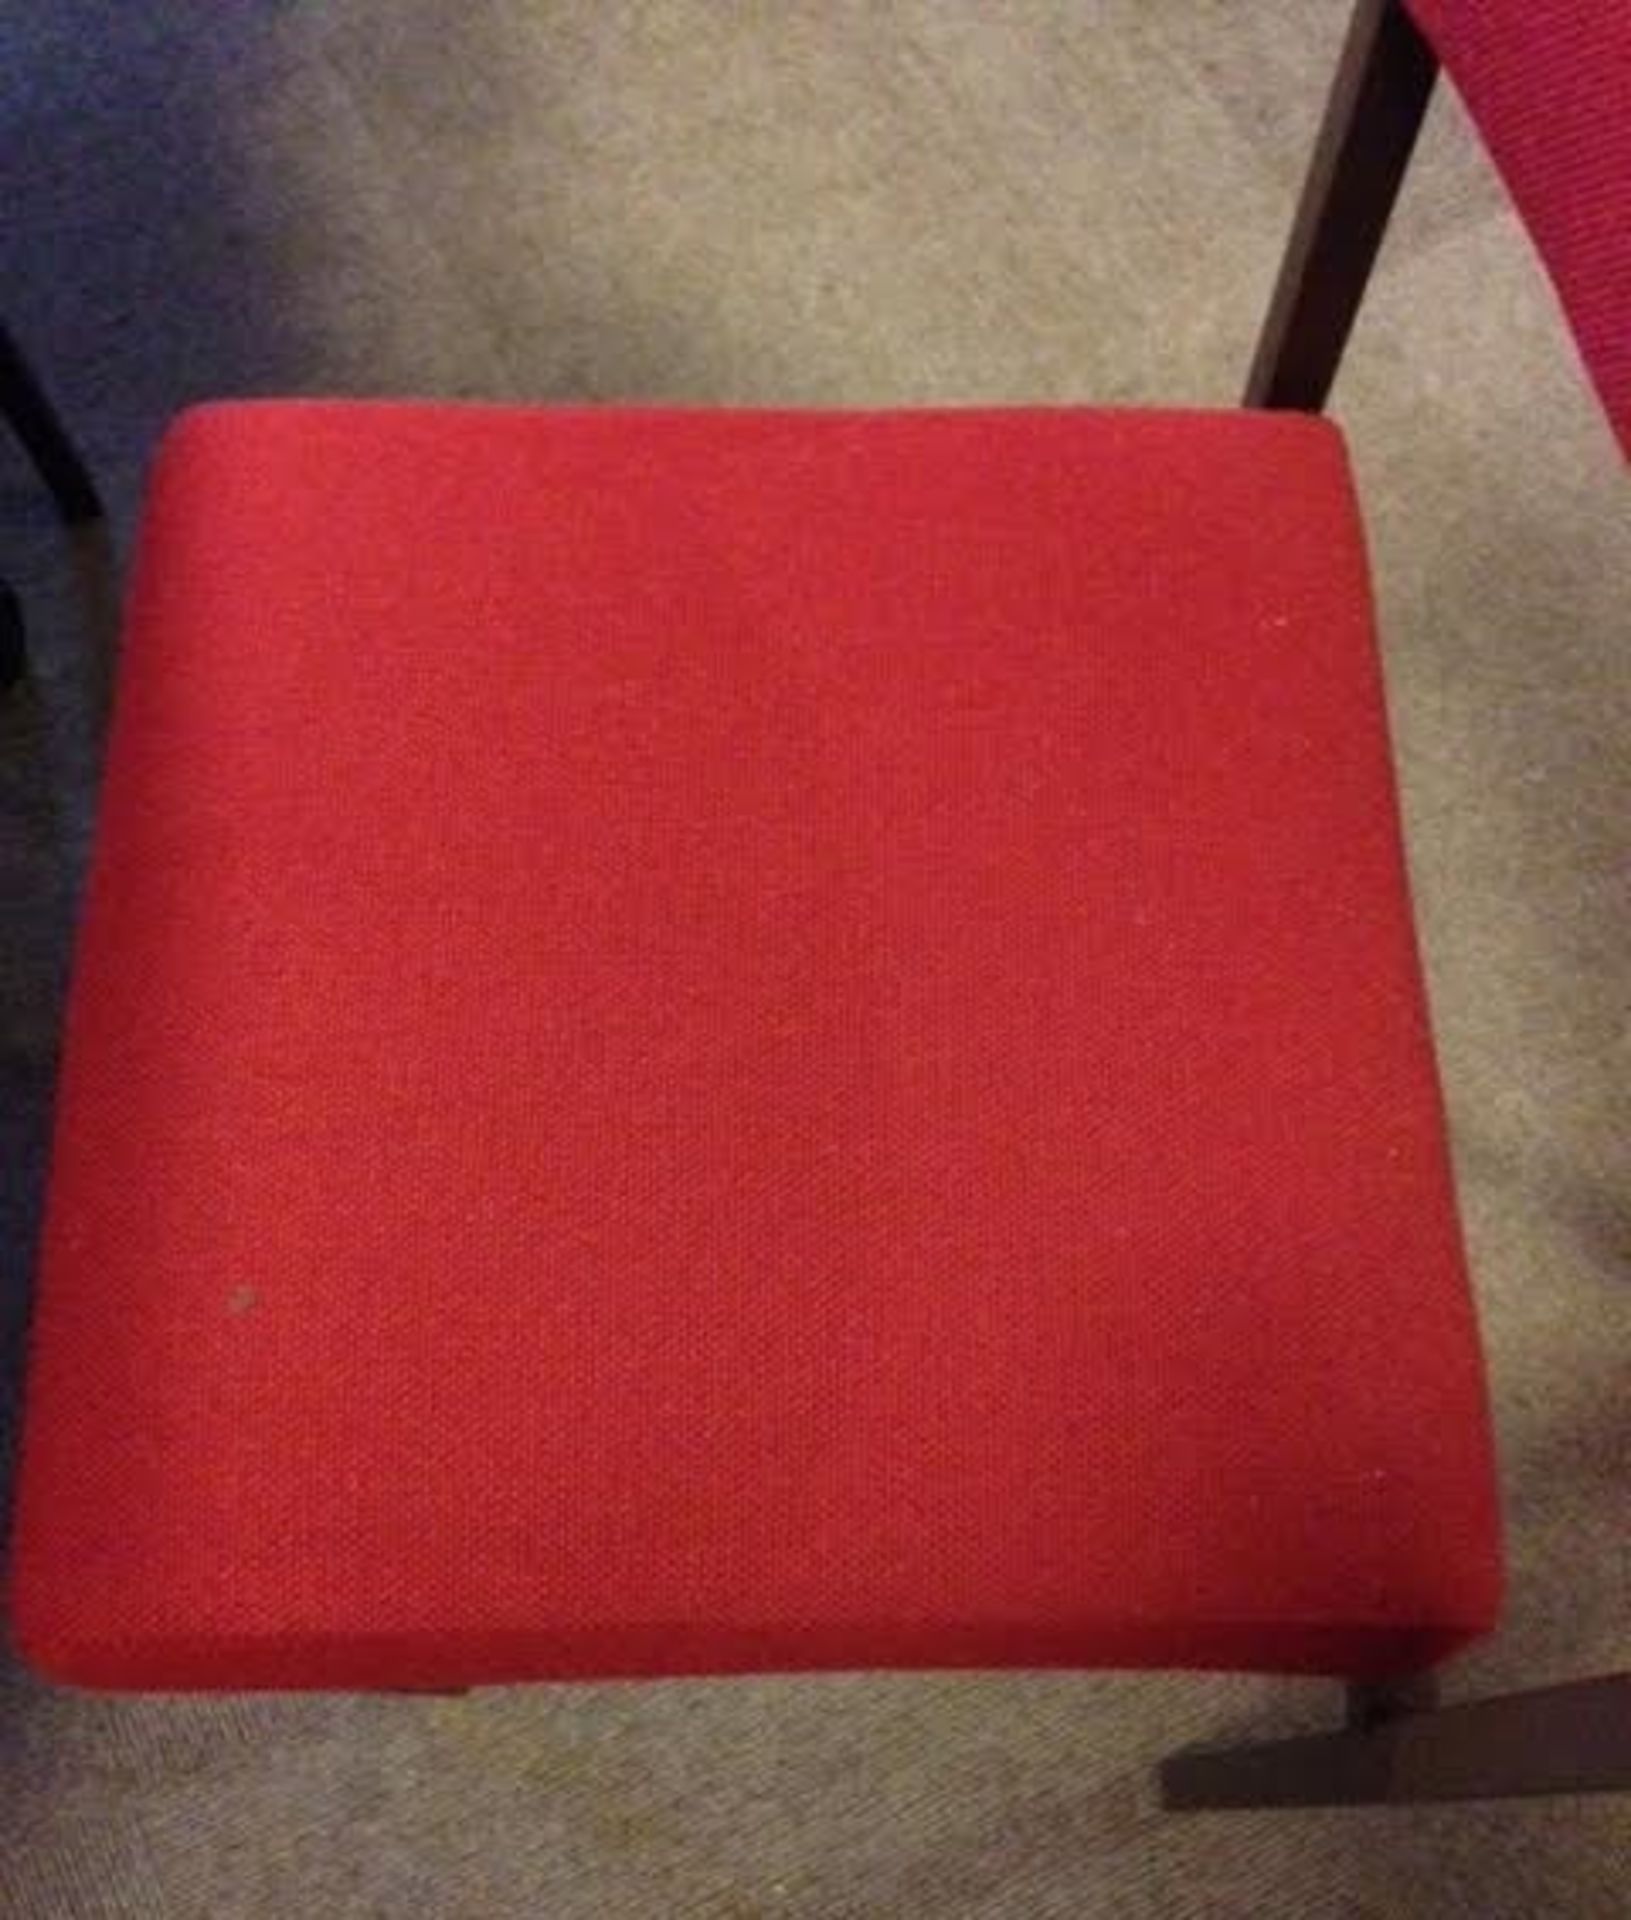 10 x Stacking Chairs - Burgundy Fabric - All In Good Condition - General Purpose Stacking Chairs For - Image 4 of 6